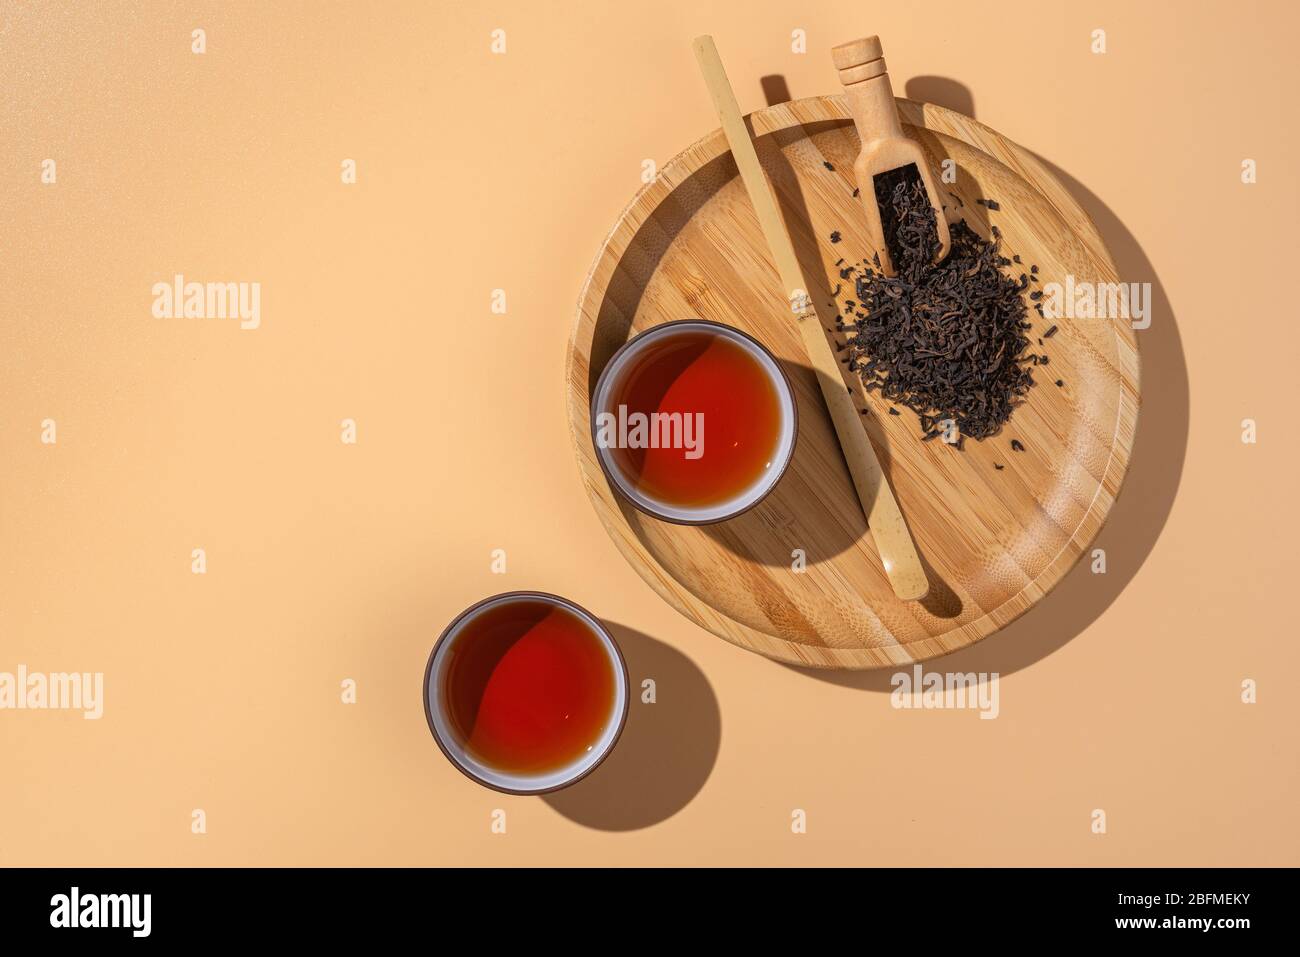 Two Ceramic Bowls With Black Puer Tea Dry Pu Erh Tea Leaves In A Wooden Bamboo Plate And Spoon On A Beige Background Stock Photo Alamy